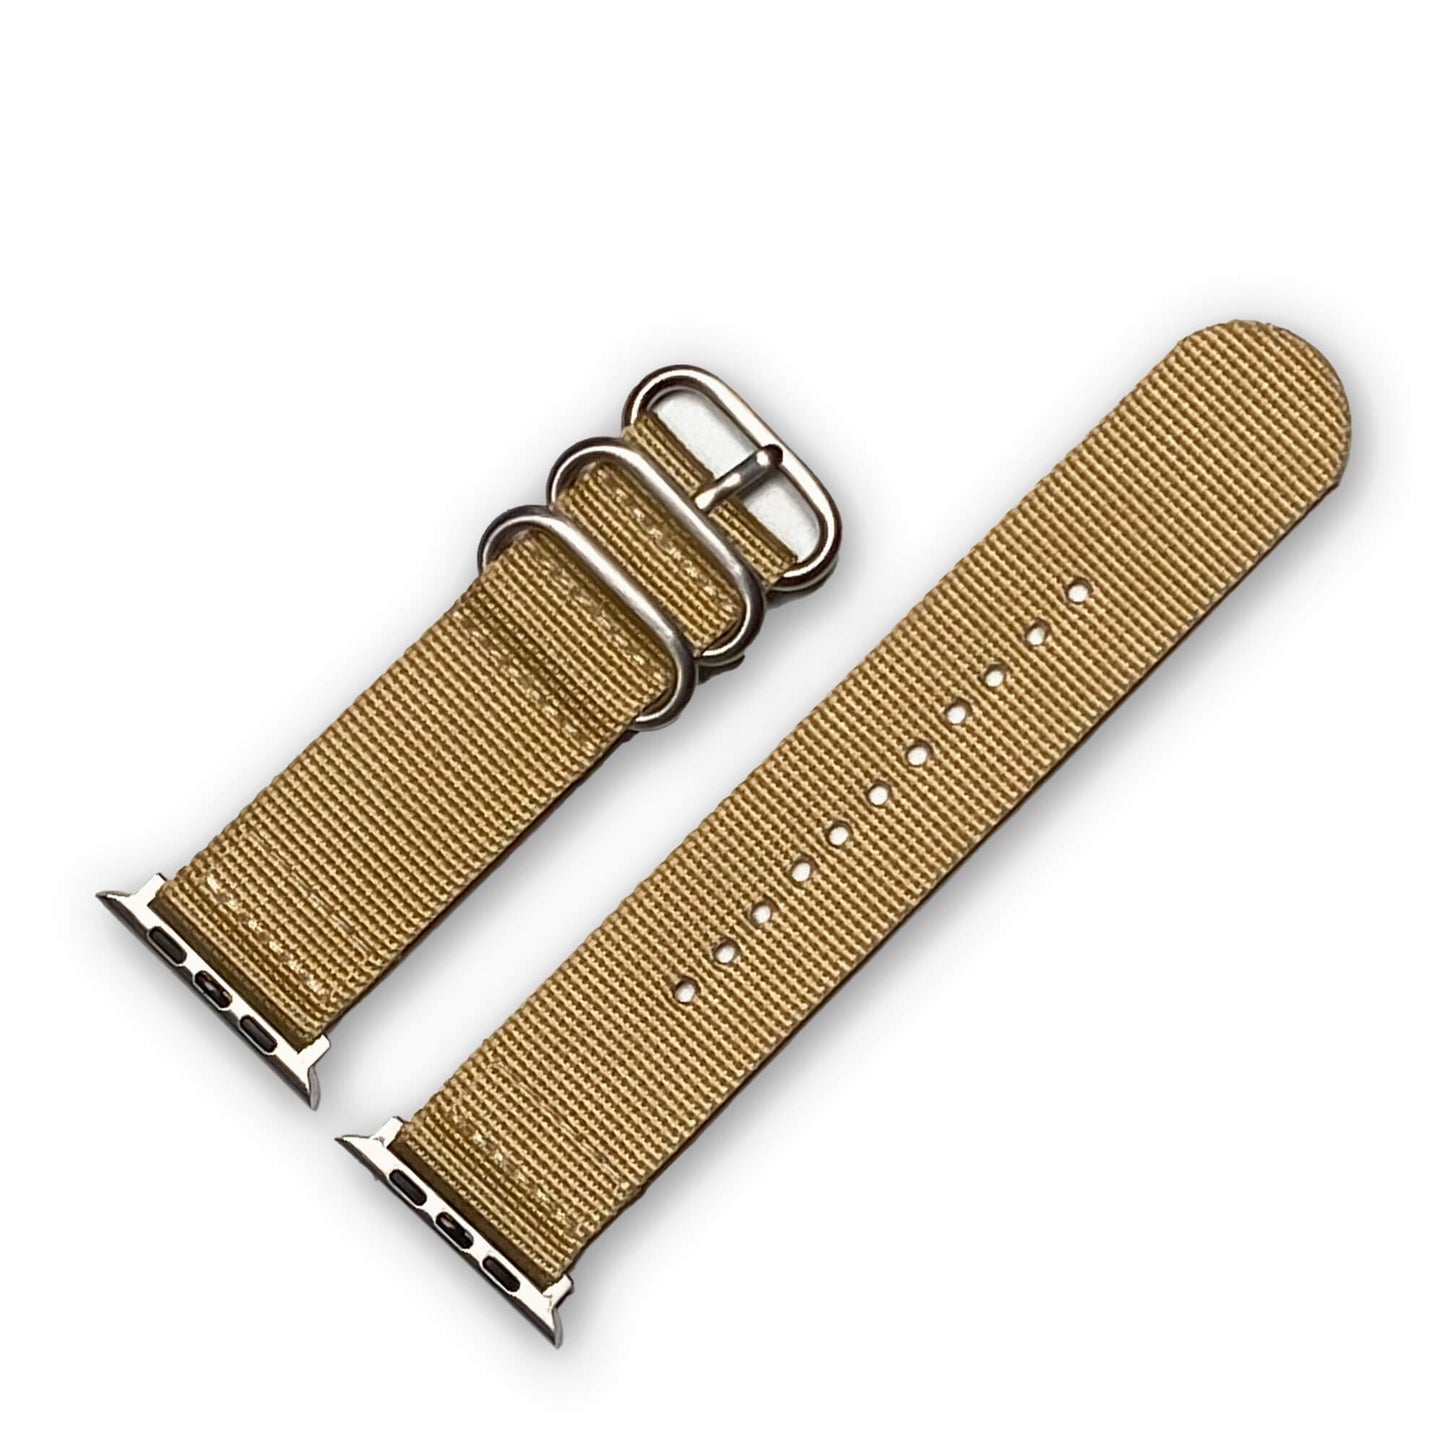 Desert Dweller Two Piece Ballistic Nylon Watch Band | Compatible with Apple Watch | Silver Hardware